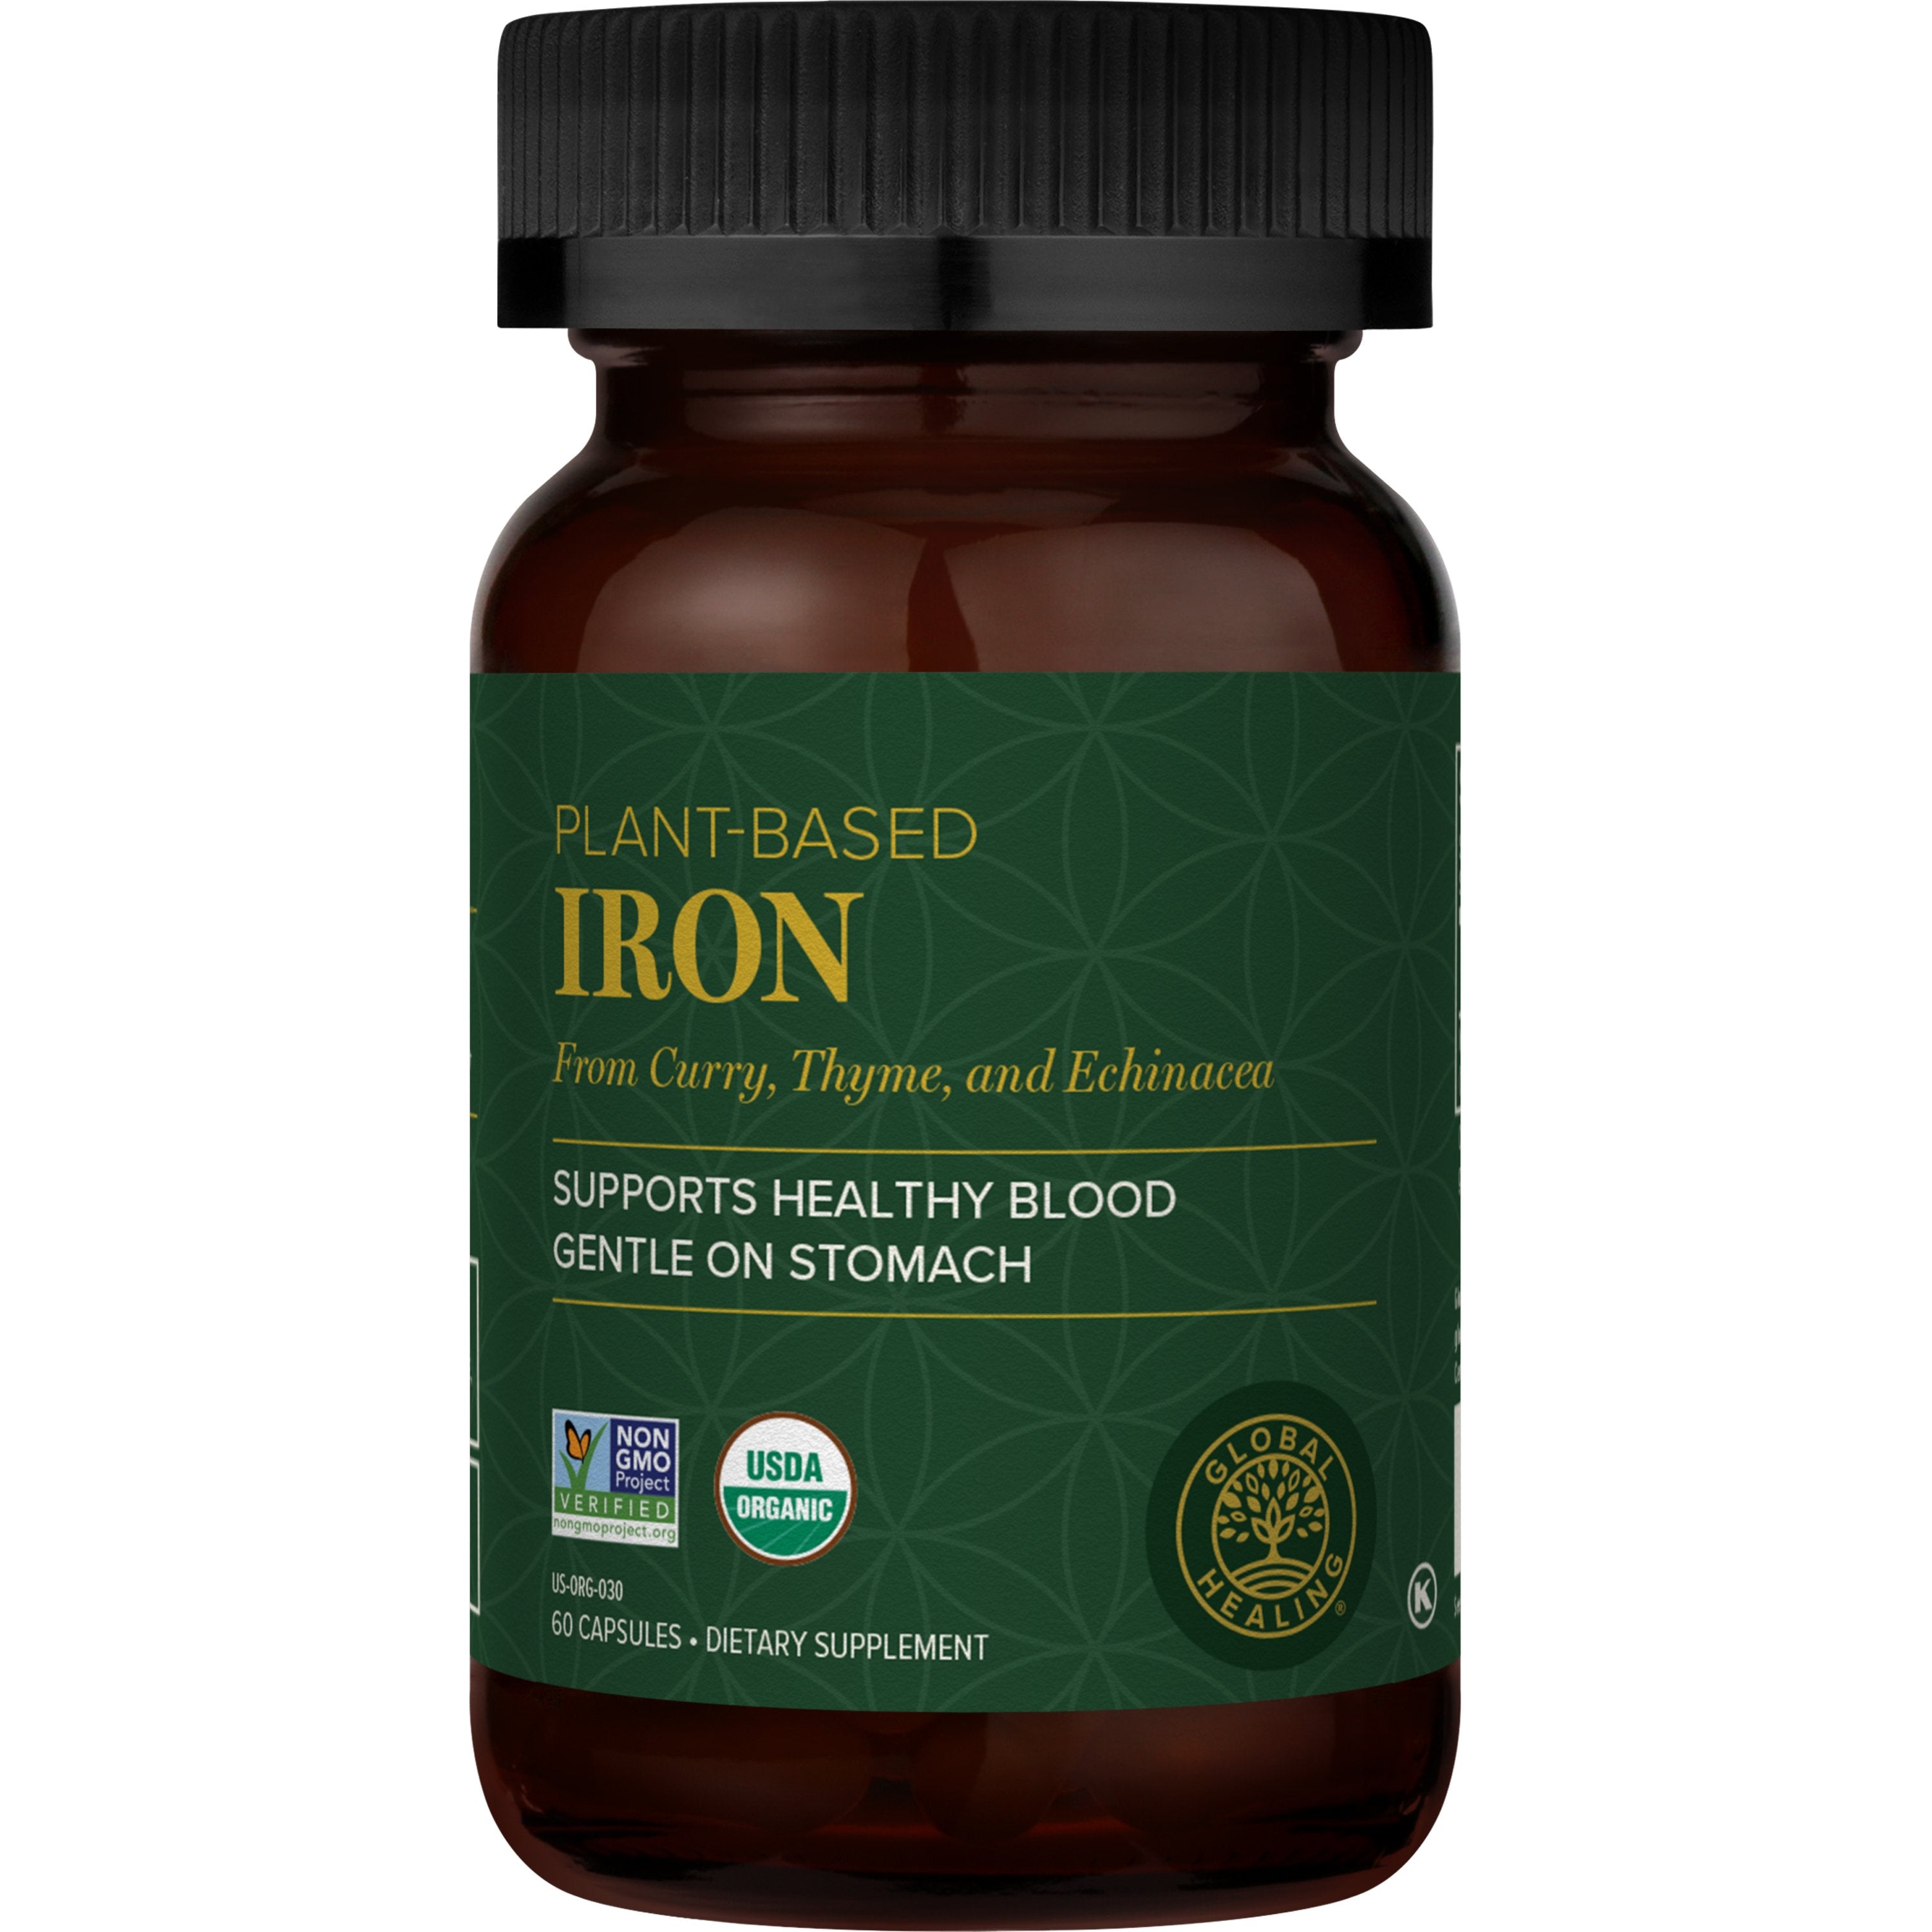 Global Healing Plant Based Iron From Curry Thyme and Echinacea Bottle 60 Capsules